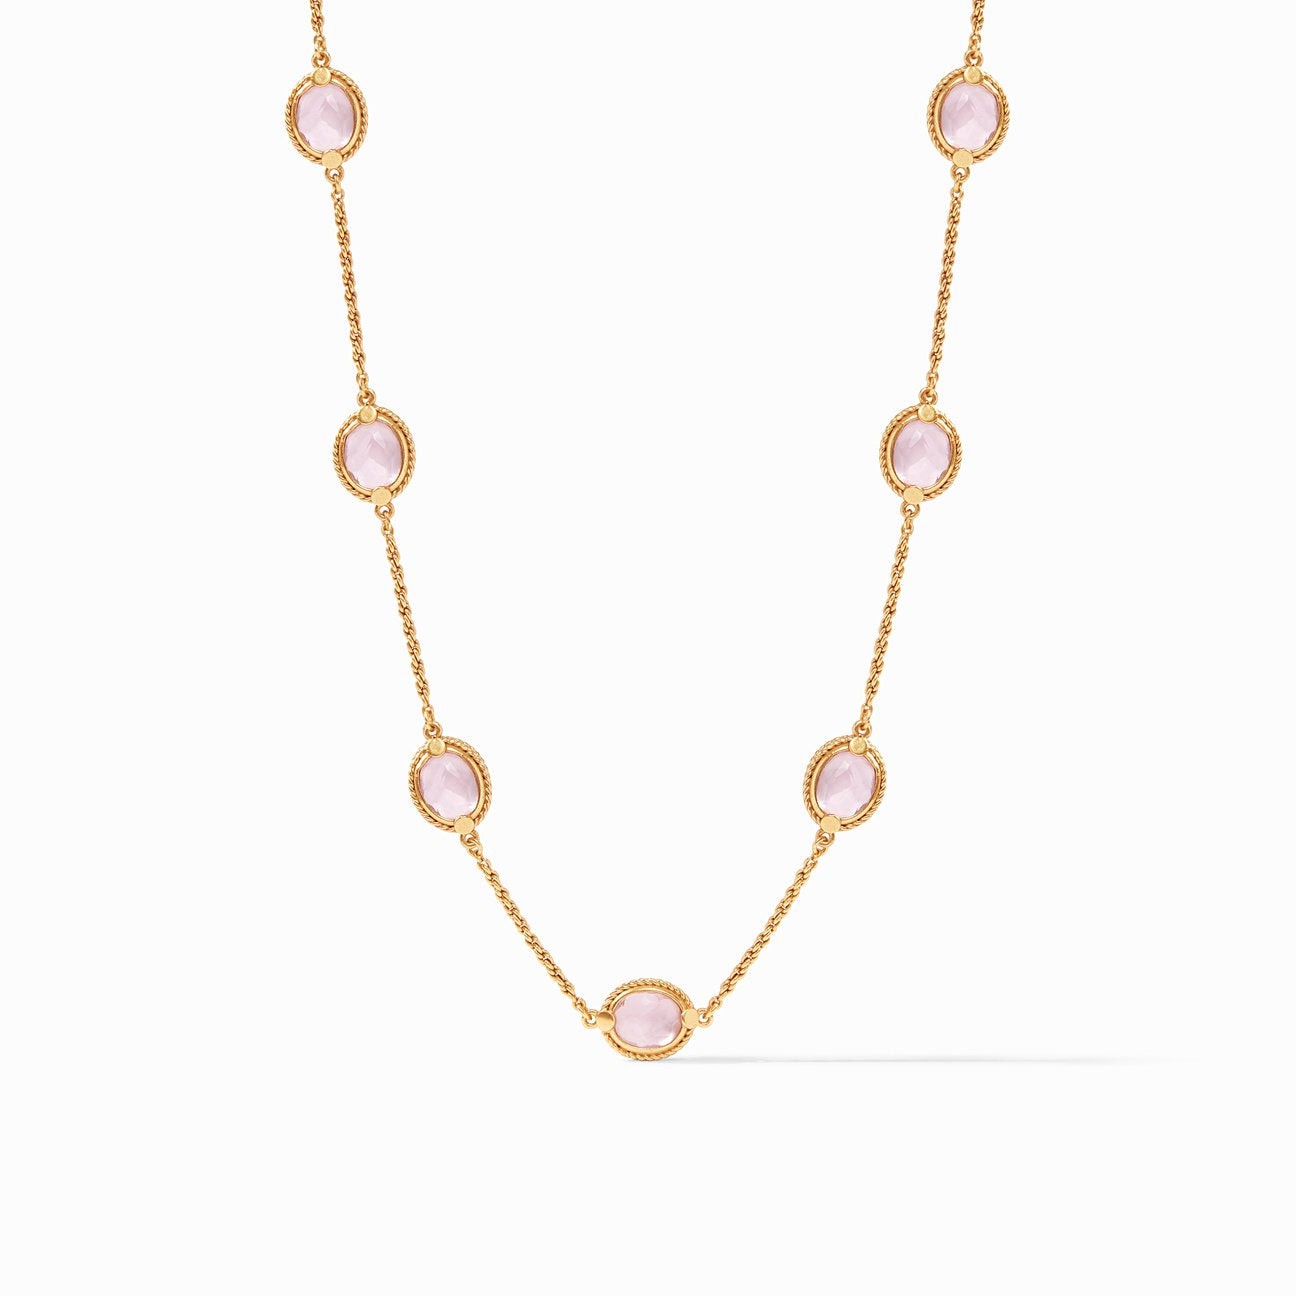 CALYPSO DELICATE STATION NECKLACE - 17/18/19 INCH - 2 COLOR OPTIONS (4665921437773)